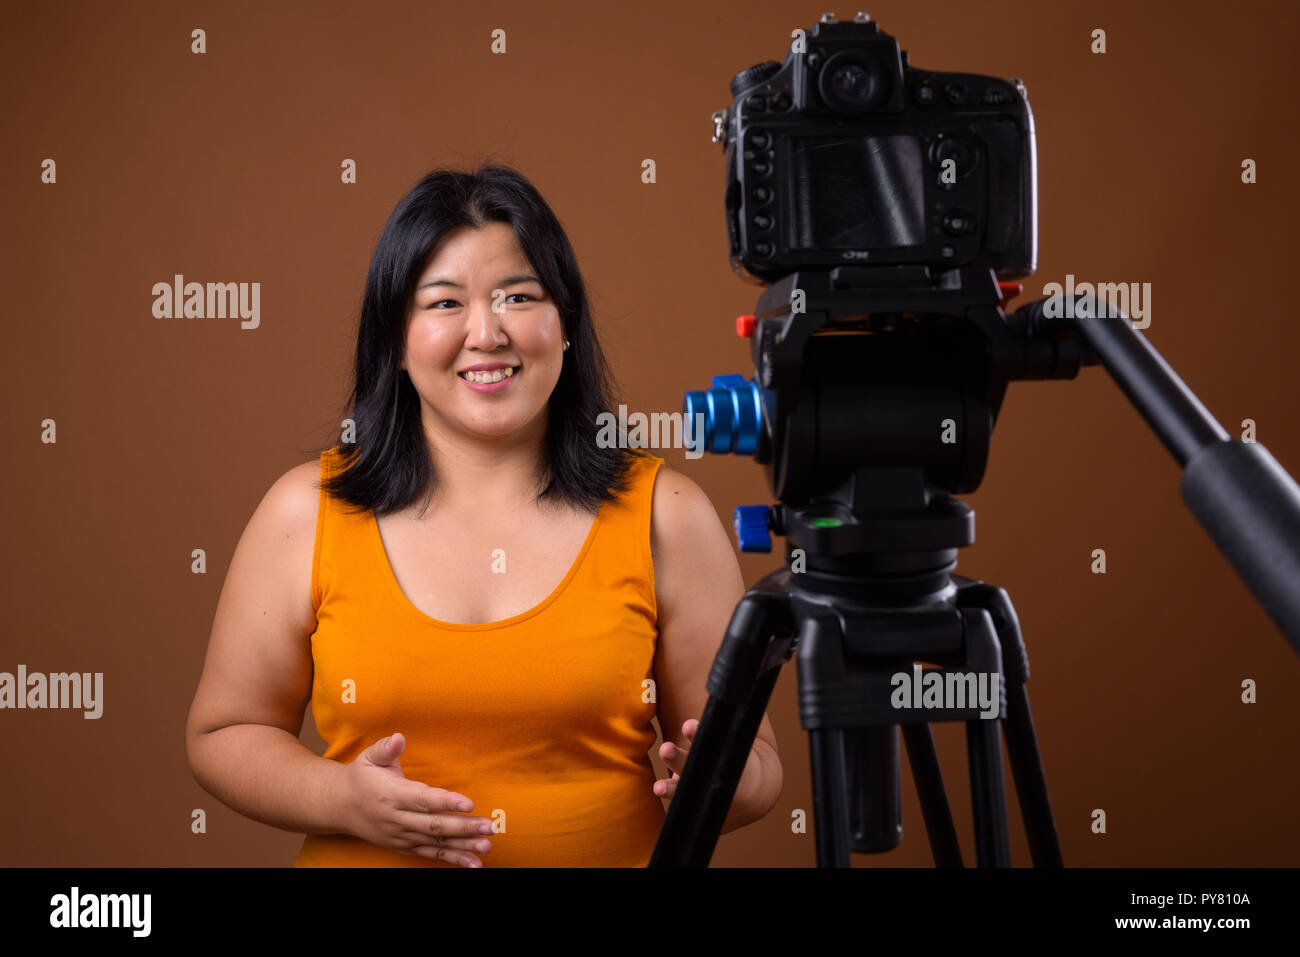 Beautiful overweight woman vlogging in studio with dslr camera on tripod Stock Photo